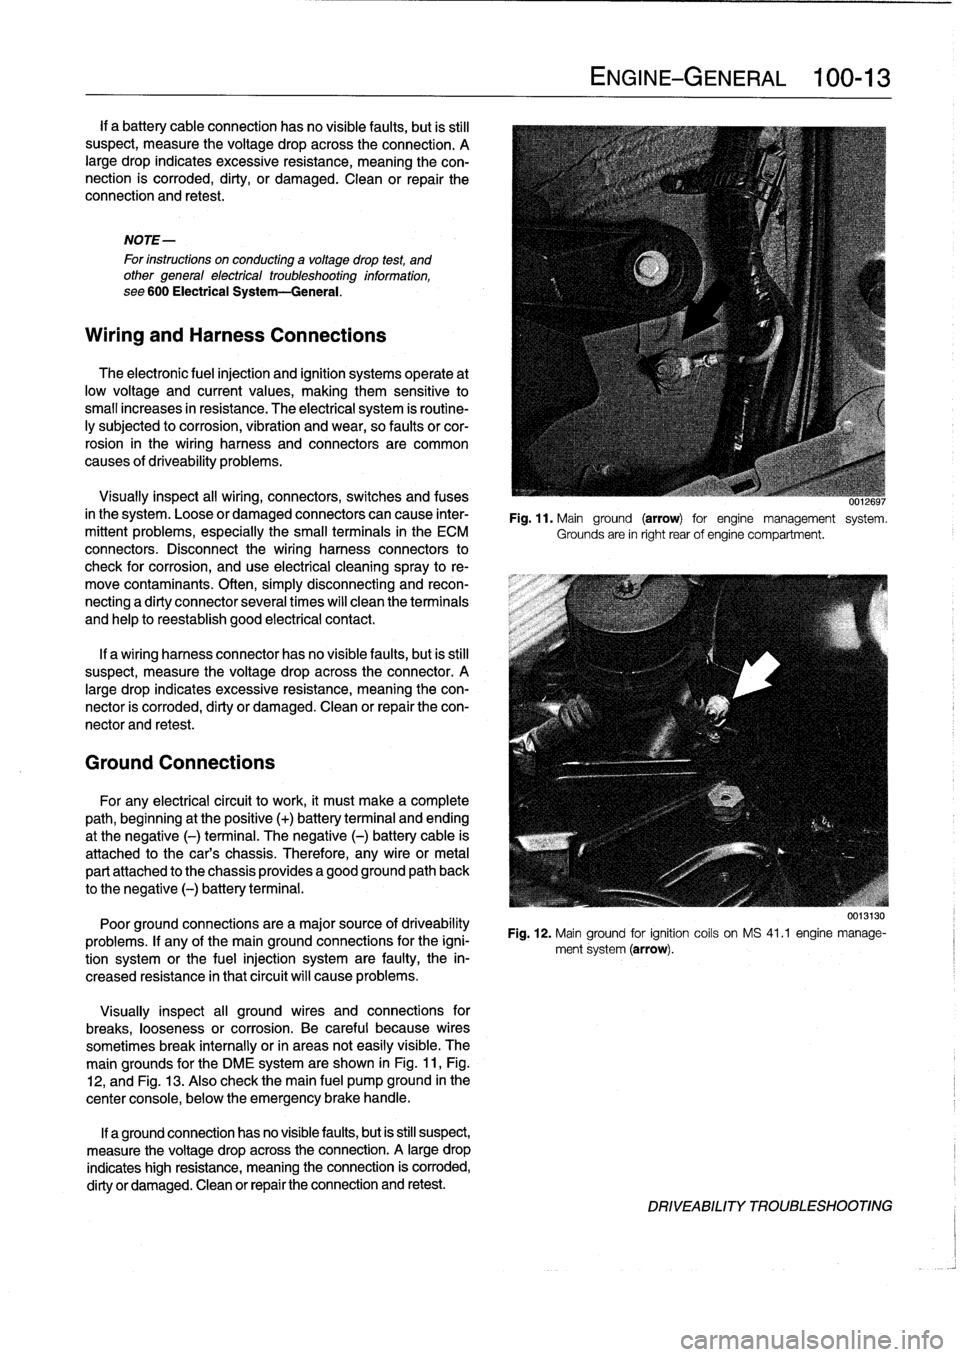 BMW 323i 1995 E36 Workshop Manual 
If
a
battery
cableconnection
hasno
visible
faults,
but
is
still
suspect,
measure
the
voltage
drop
across
the
connection
.
A
large
drop
indicates
excessive
resistance,
meaning
the
con-
nection
is
corr